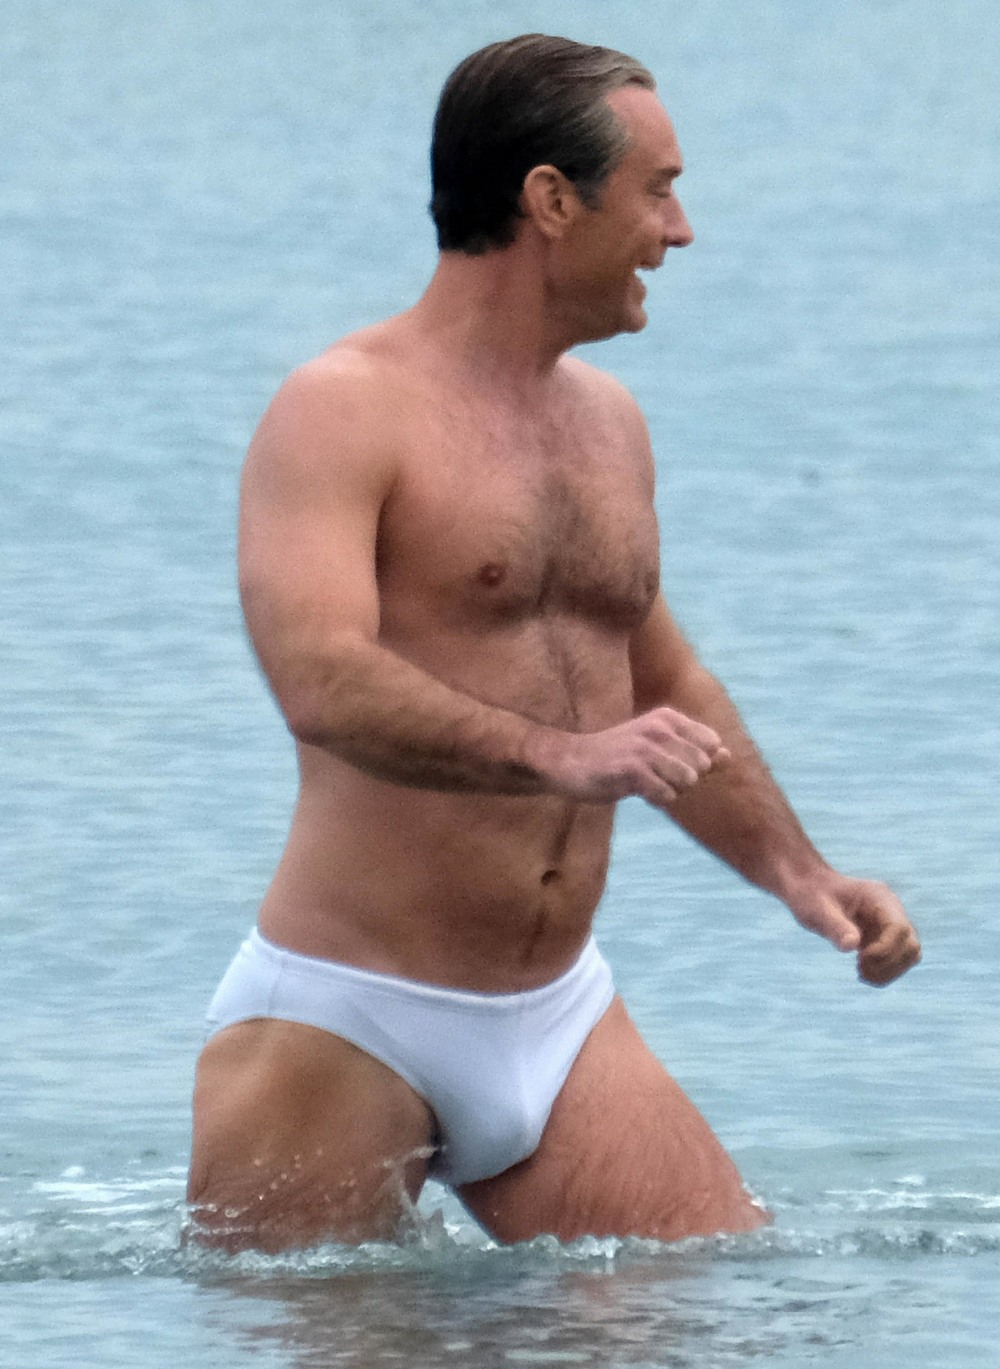 Jude Law films 'The New Pope' in a papal Speedo in Venice: yay or...